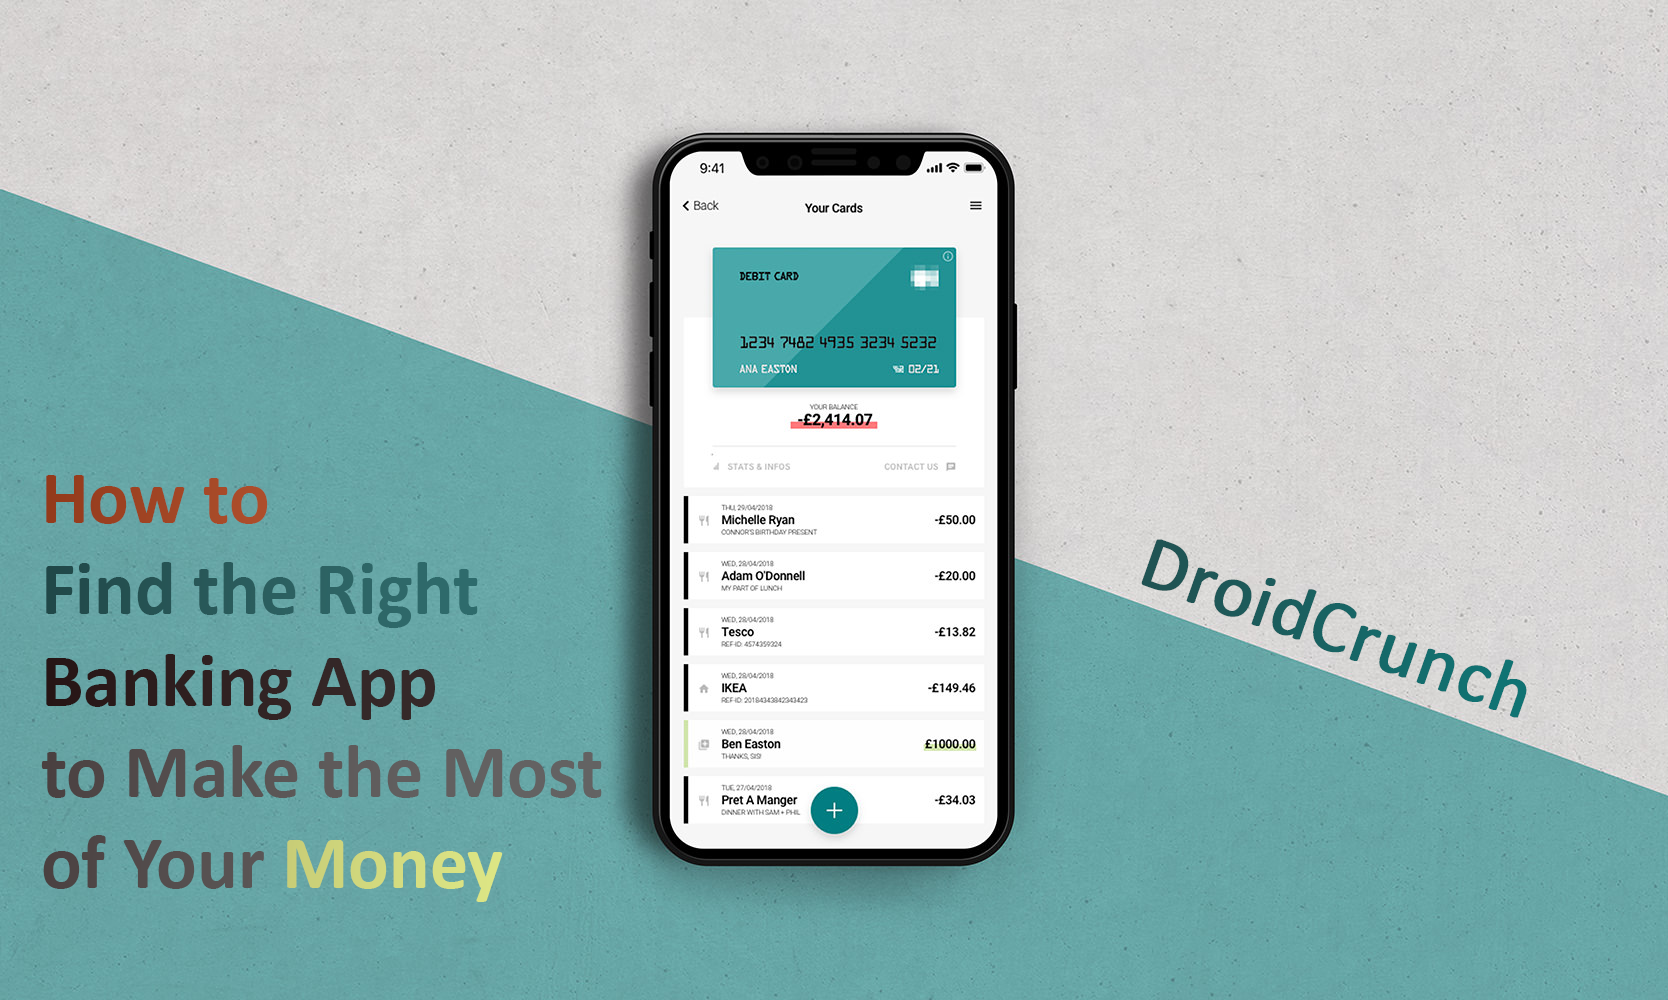 How to Find the Right Banking App to Make the Most of Your Money